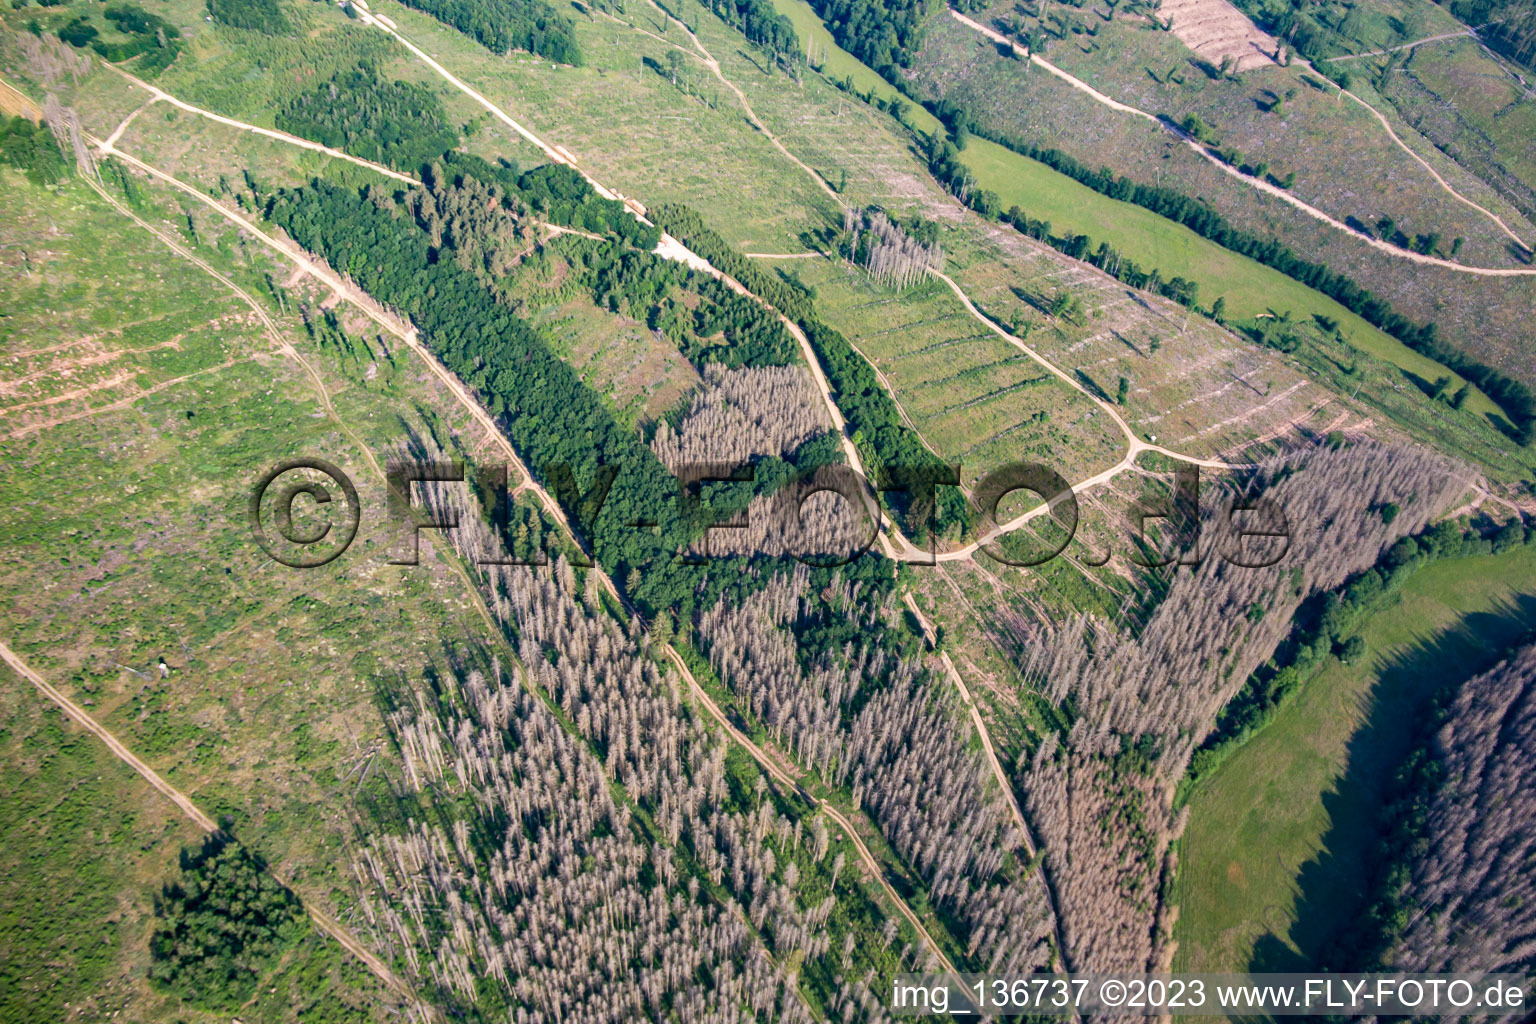 Remains of the bark beetle forest and reforestation in the district Rotha in Sangerhausen in the state Saxony-Anhalt, Germany